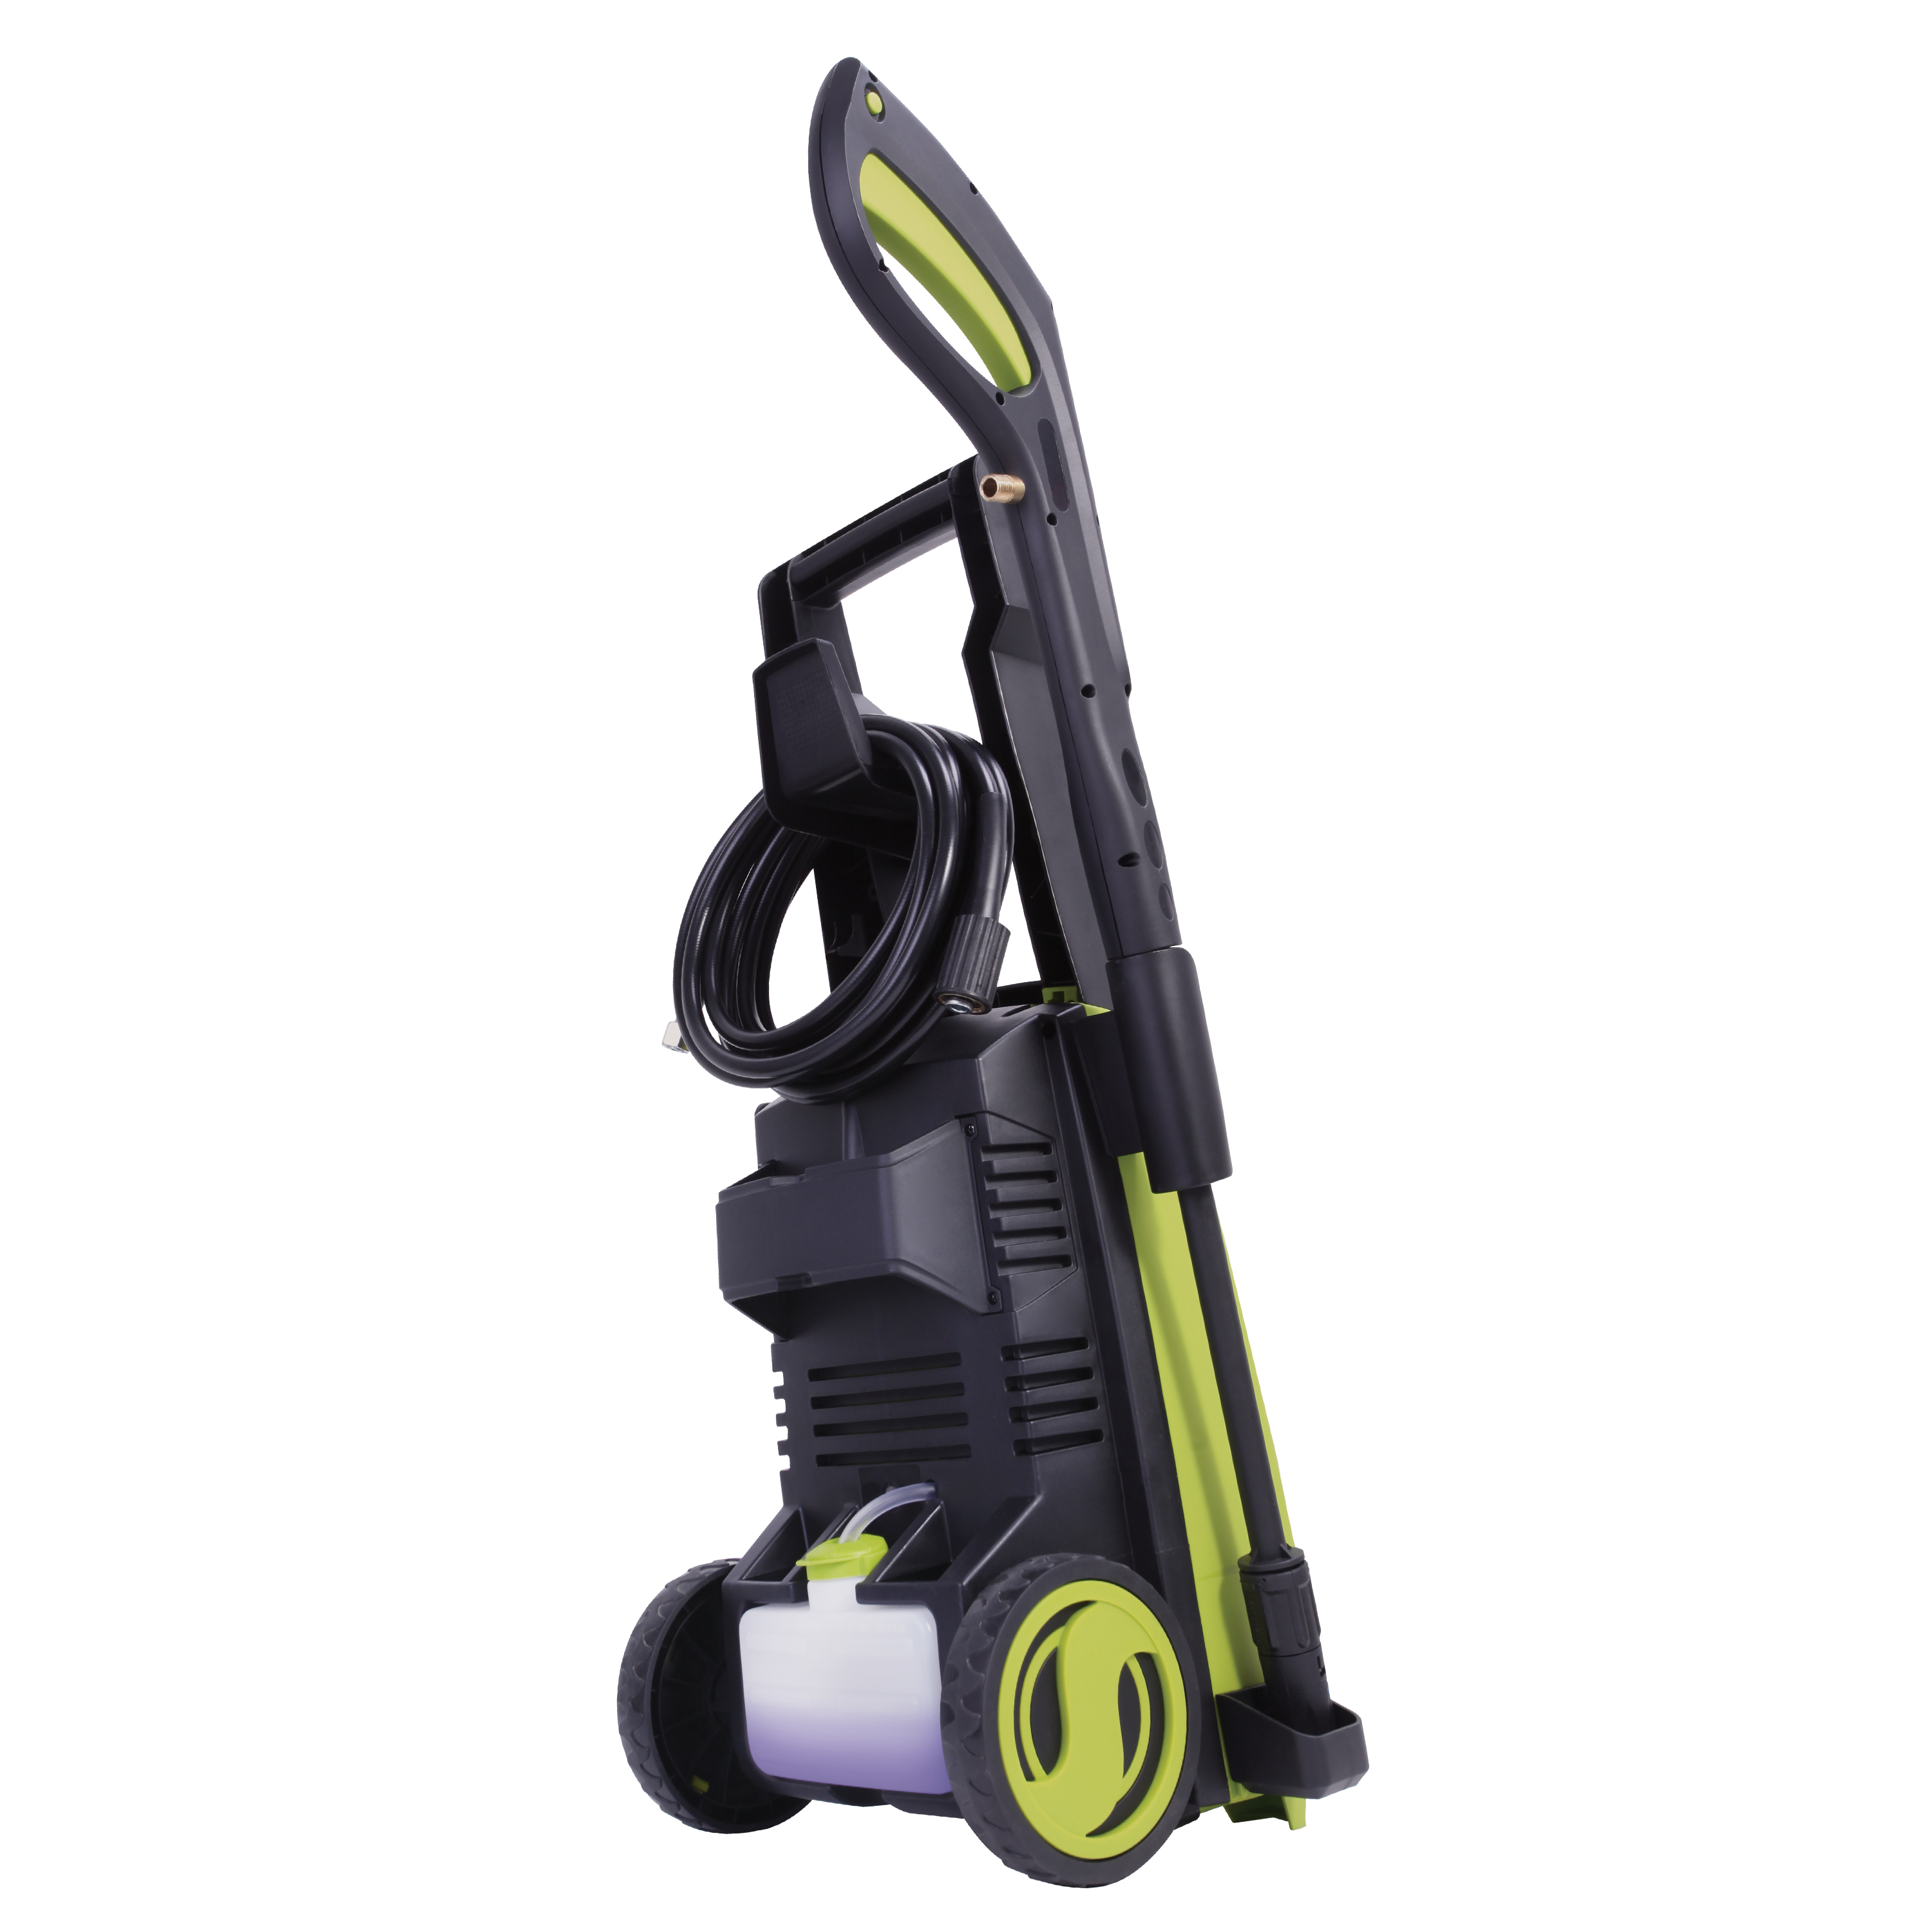 Sun Joe SPX2597 Electric Pressure Washer with Variable Control Lance, 14.5-Amp, Adjustable Wand - image 5 of 6